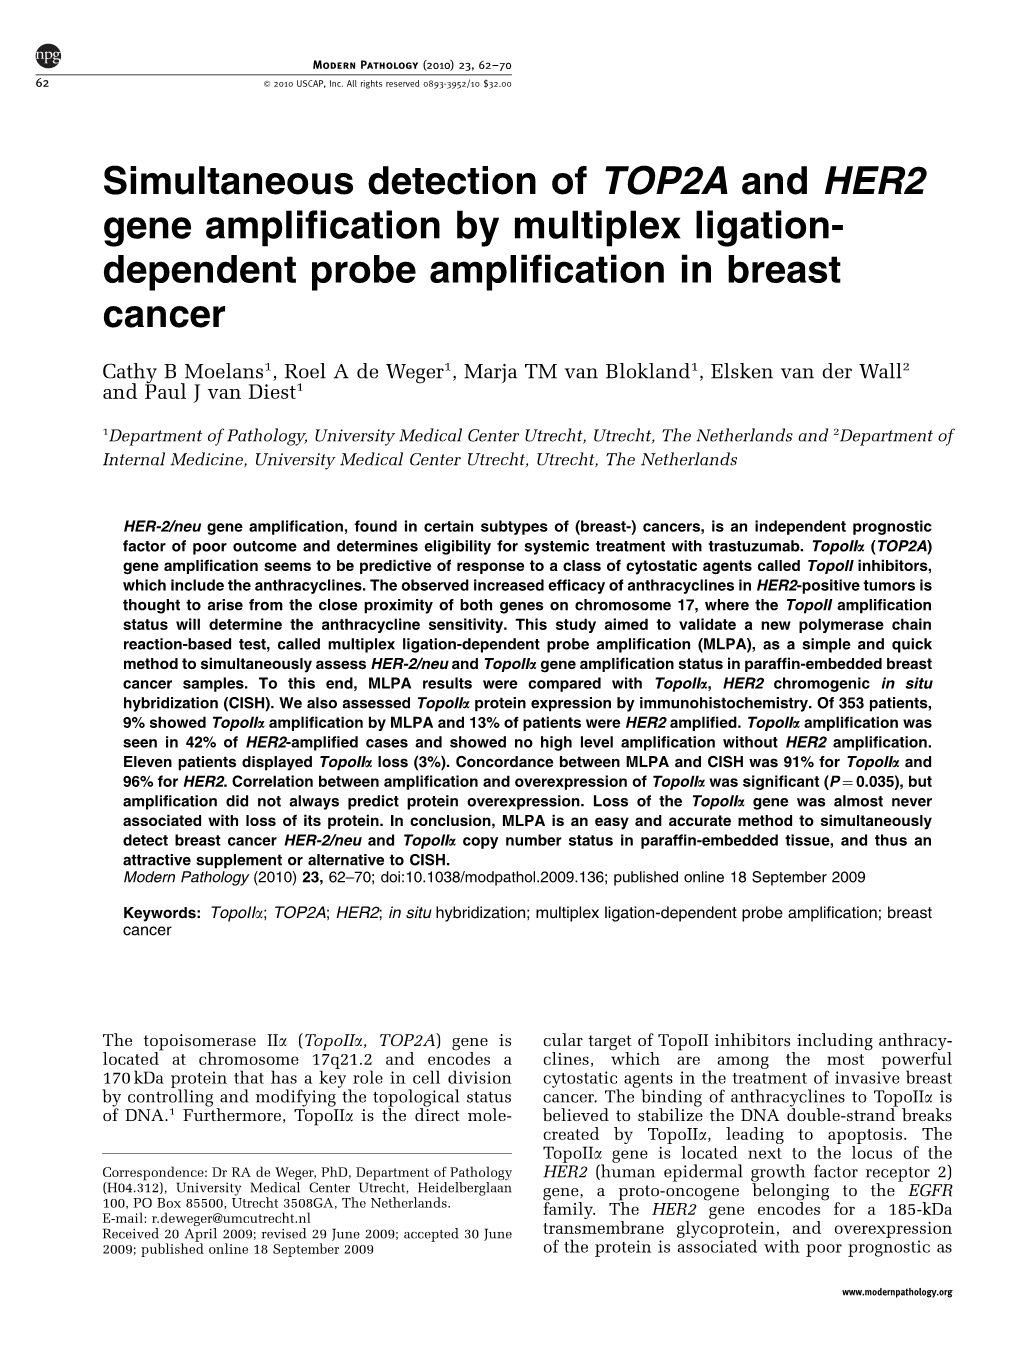 Dependent Probe Amplification in Breast Cancer